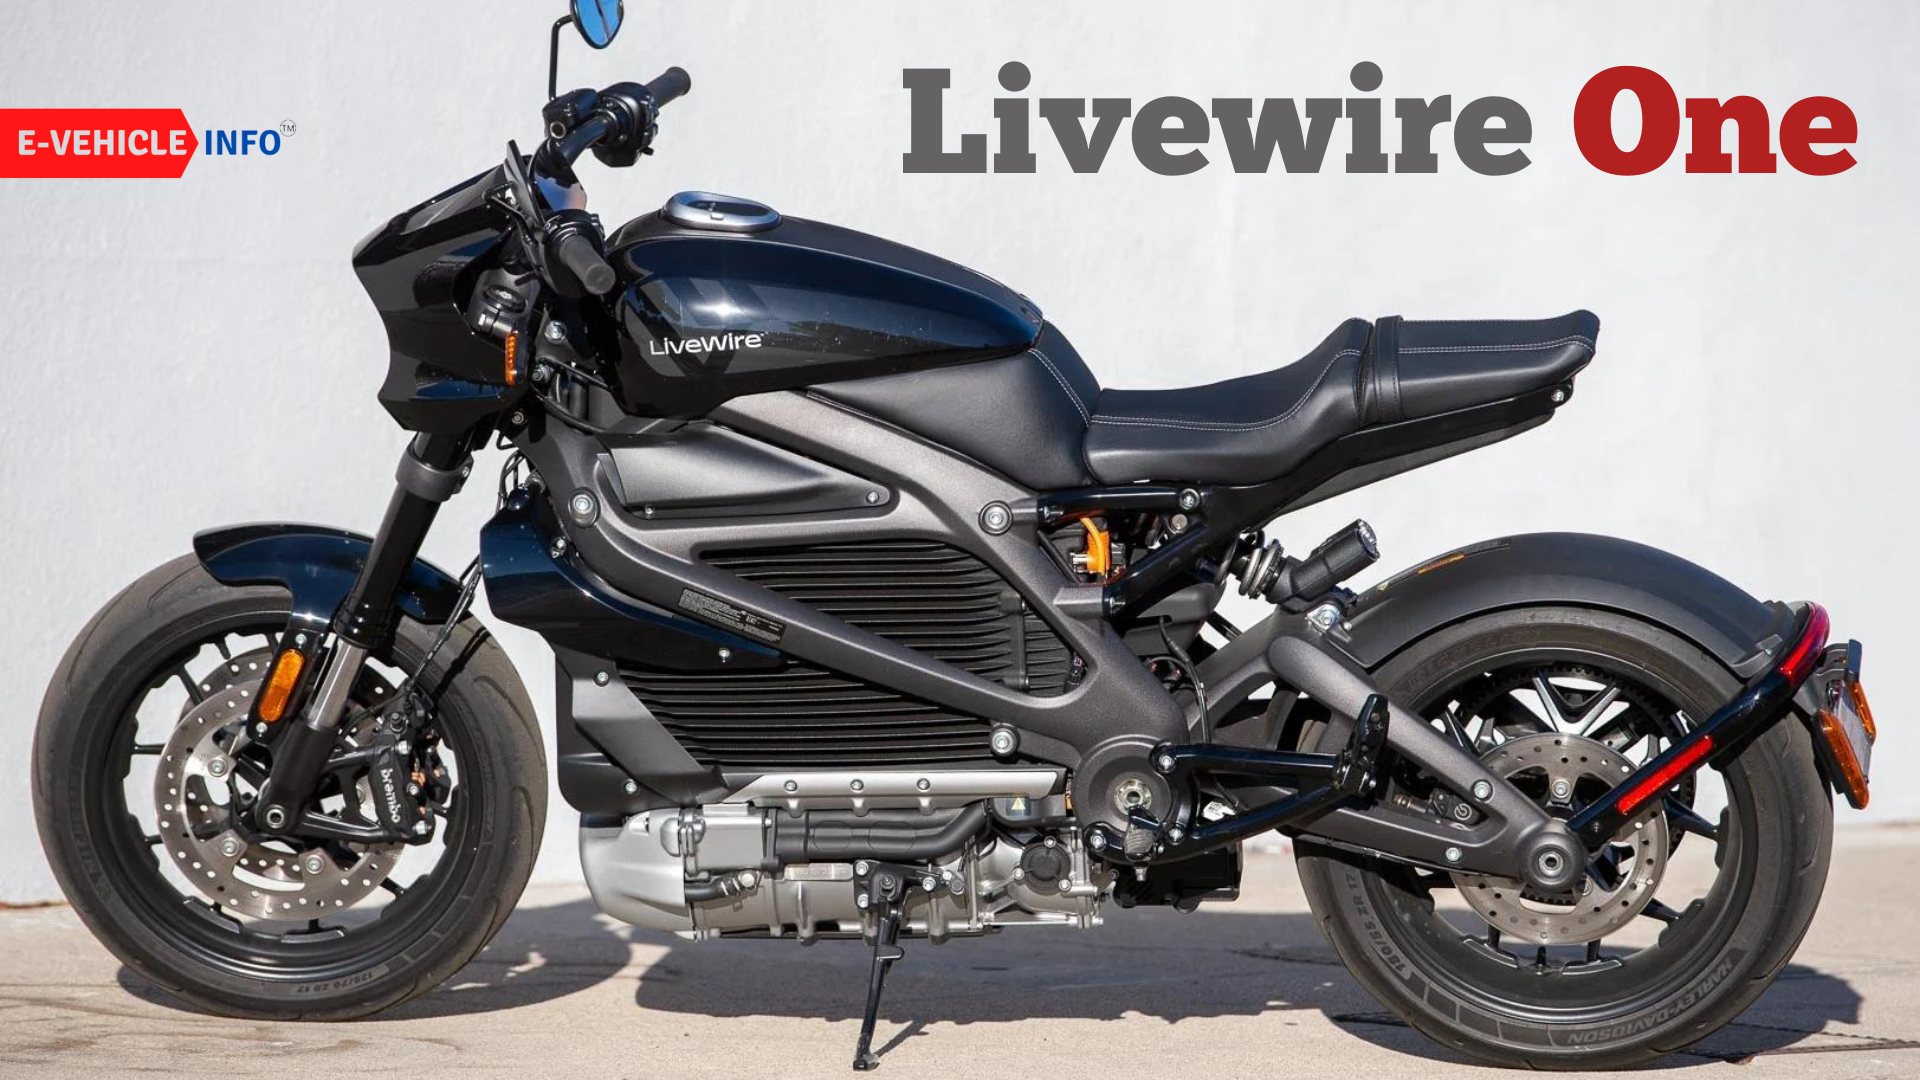 https://e-vehicleinfo.com/global/livewire-one-electric-motorcycle-price-specs-launch-highlights/